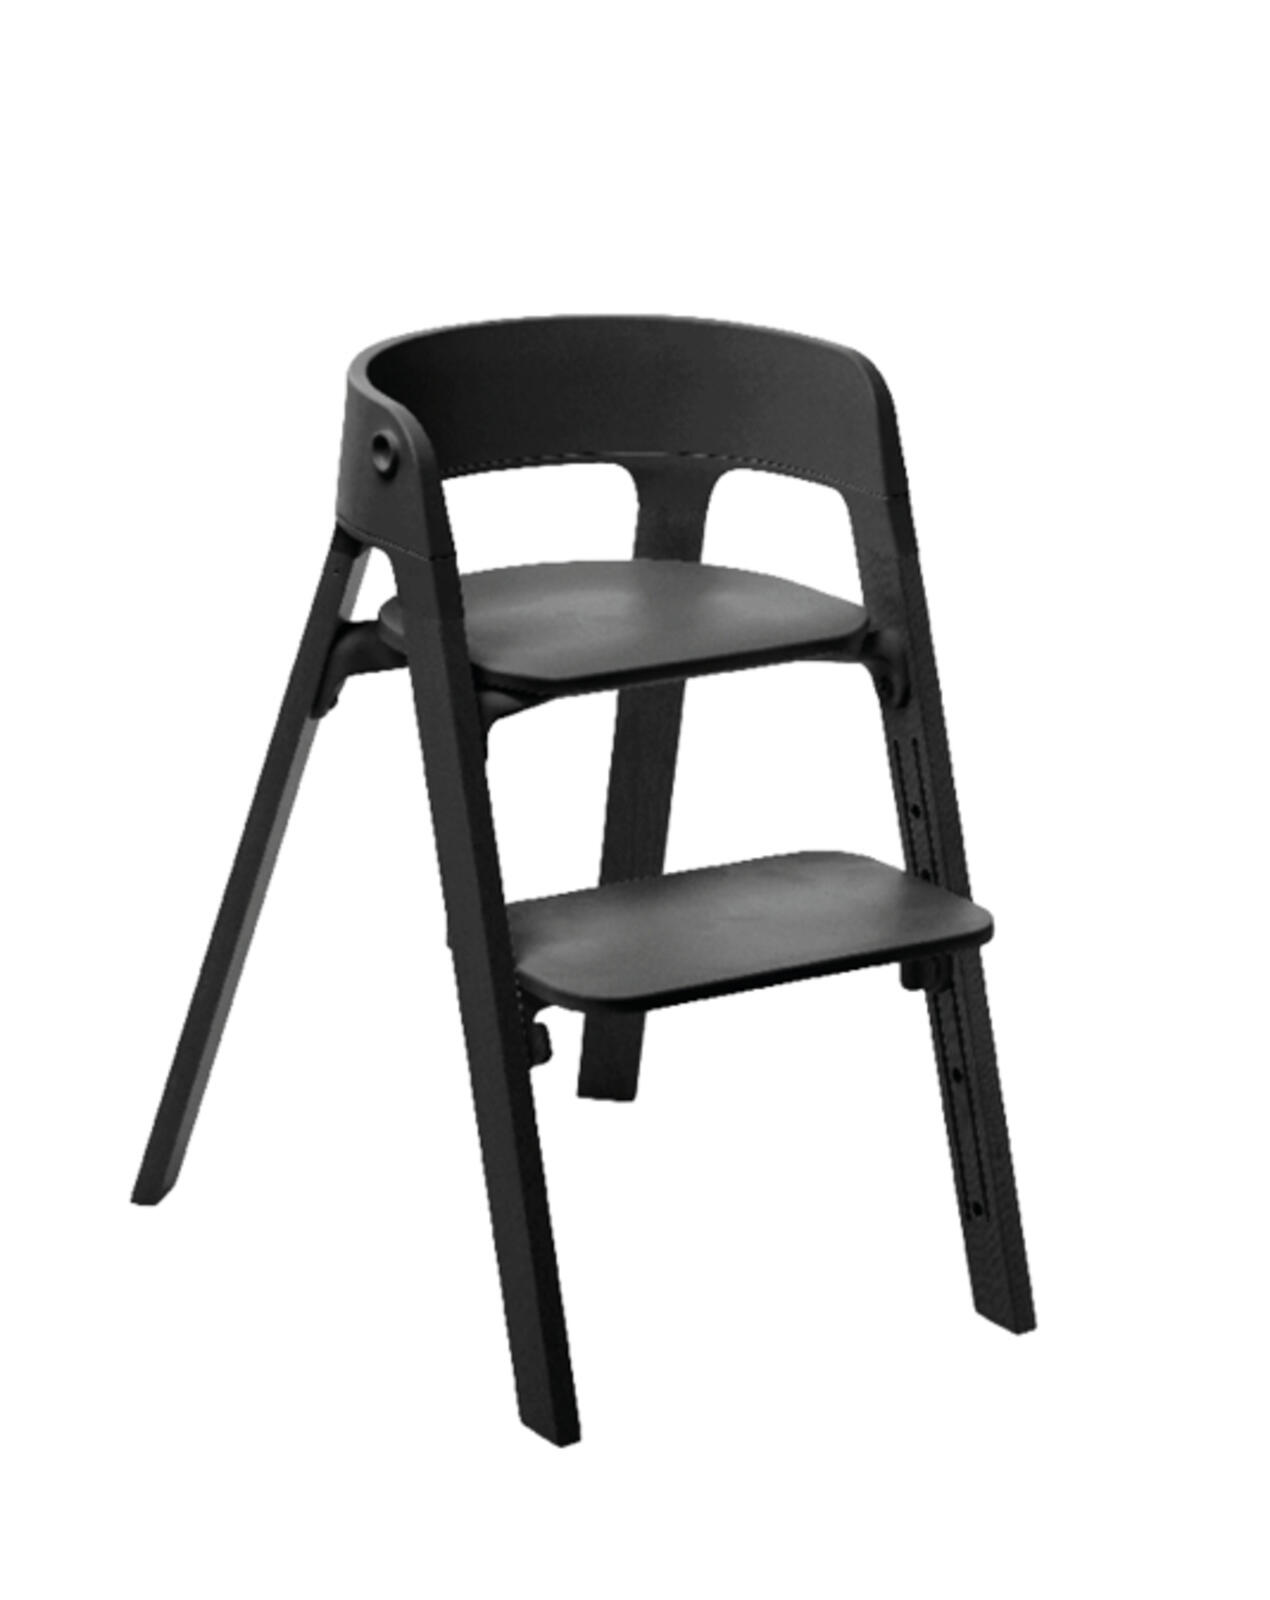 Steps chair in color black.